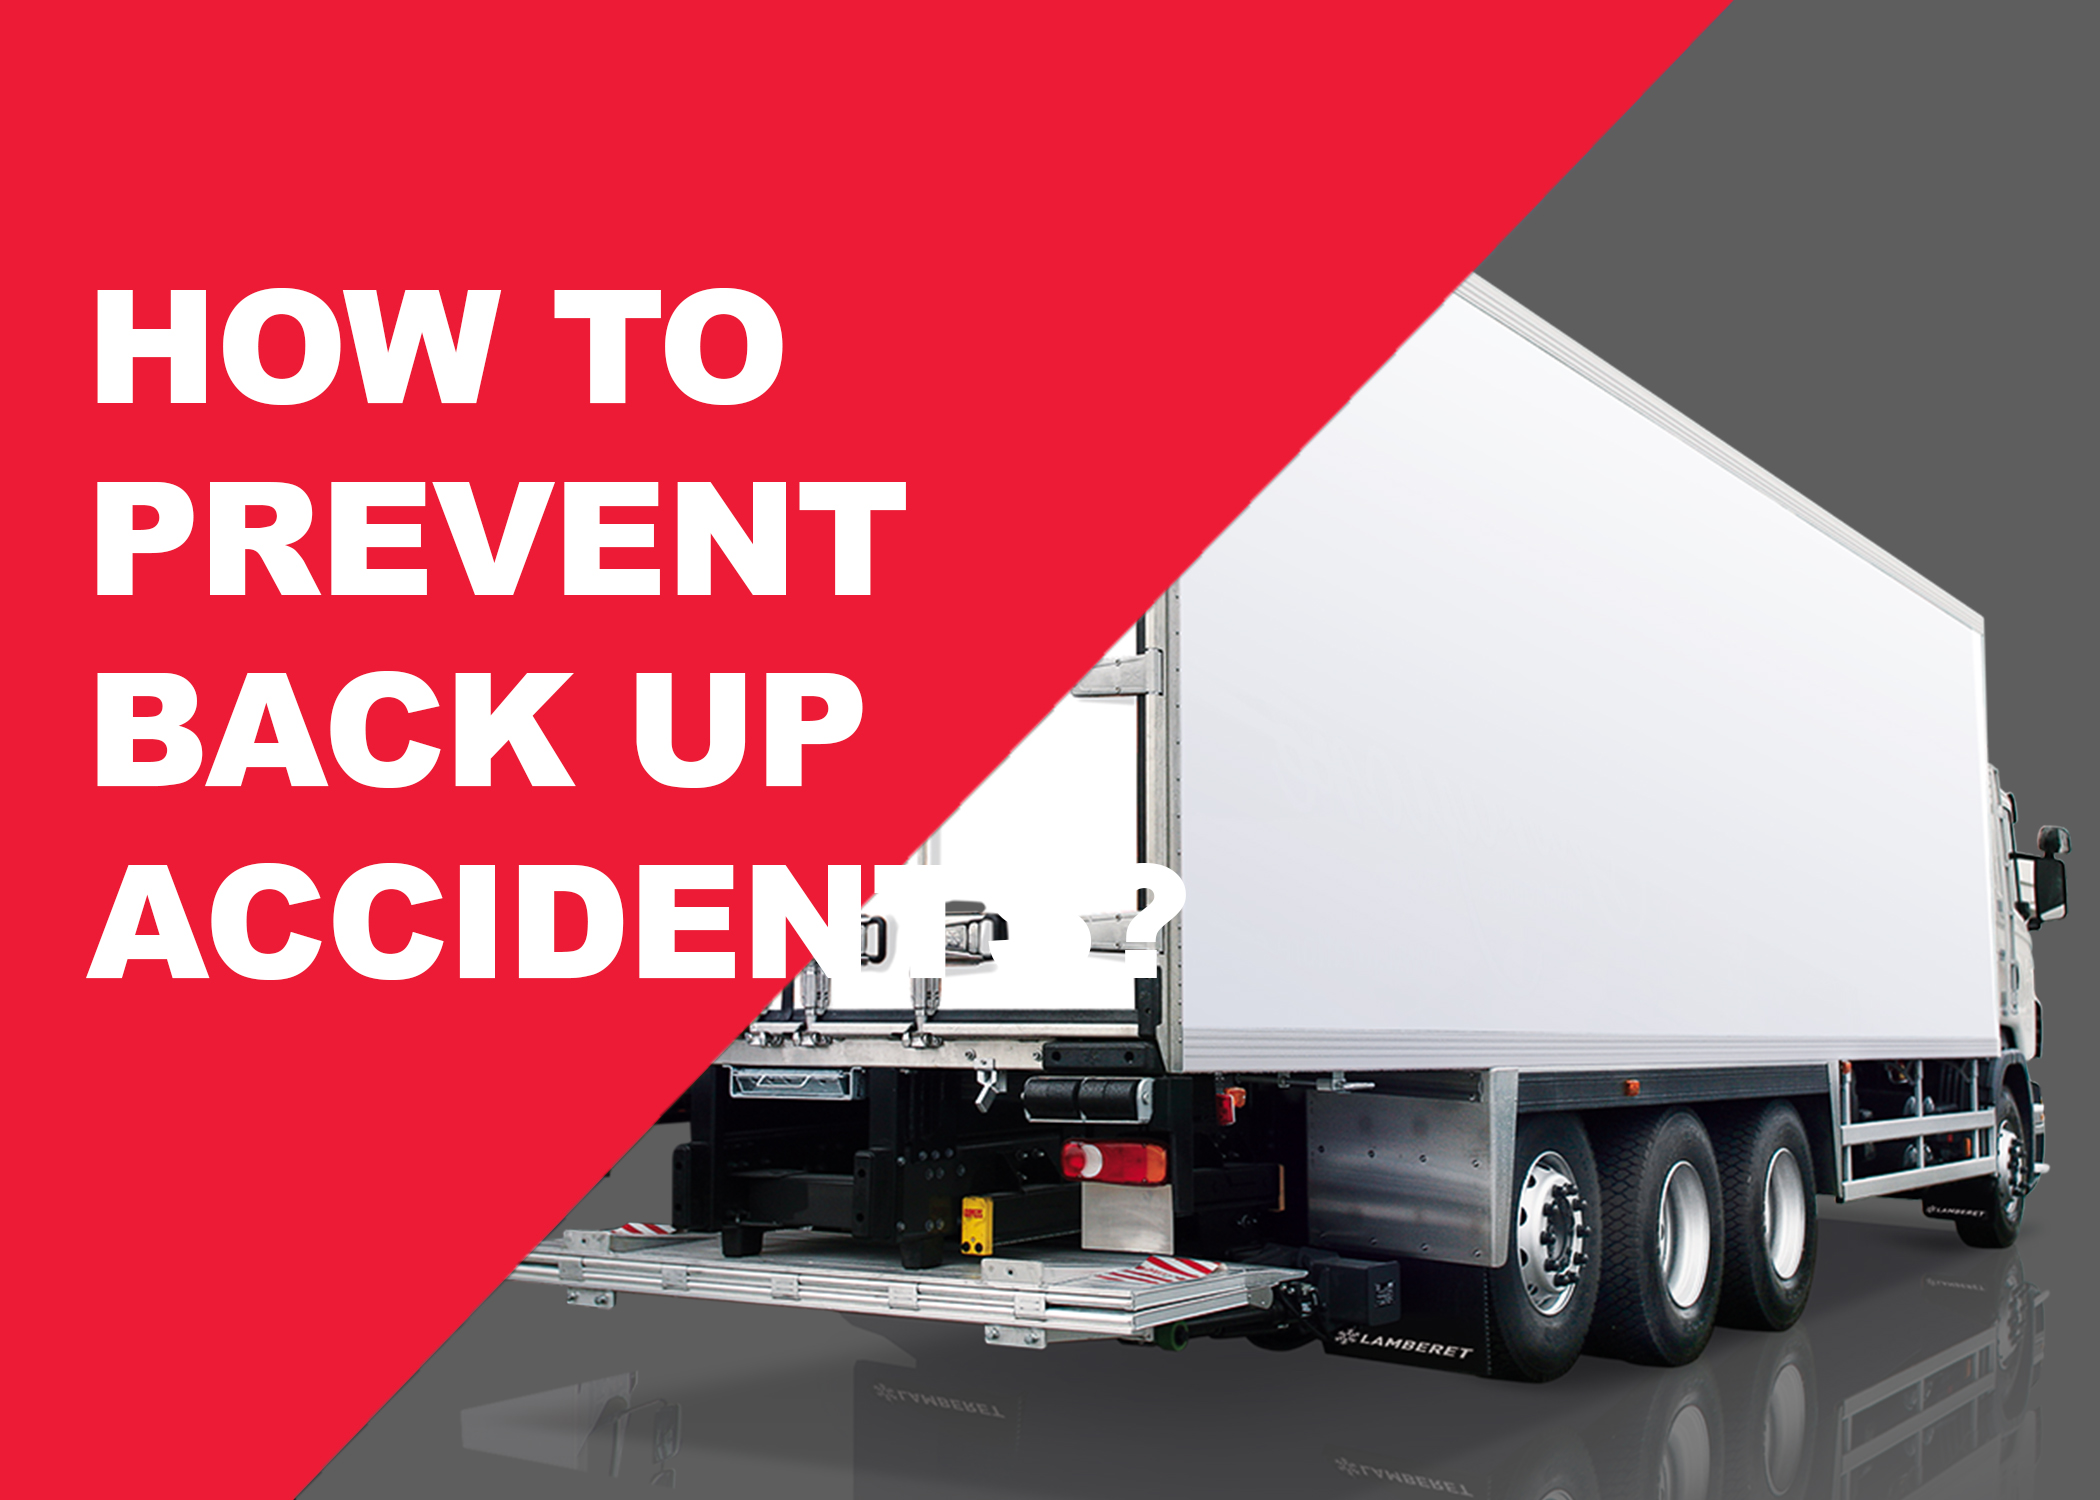 HOW TO PREVENT BACK UP ACCIDENTS?